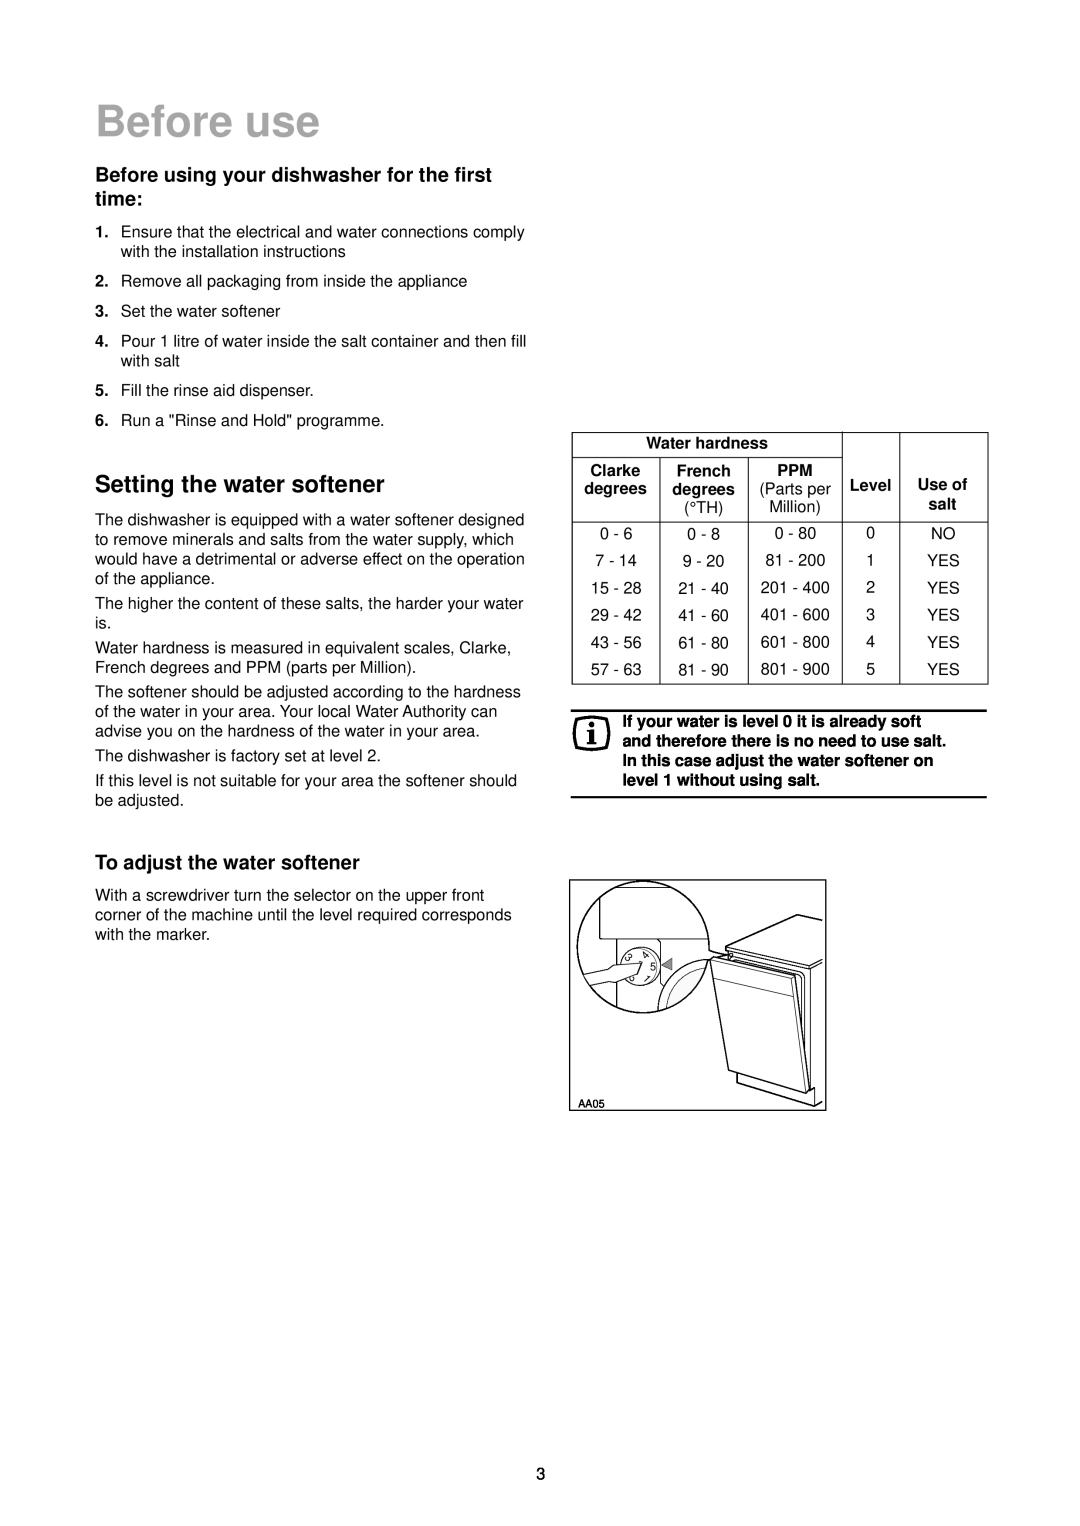 Zanussi DA 6152 manual Before use, Setting the water softener, To adjust the water softener, French, Level, Use of, salt 